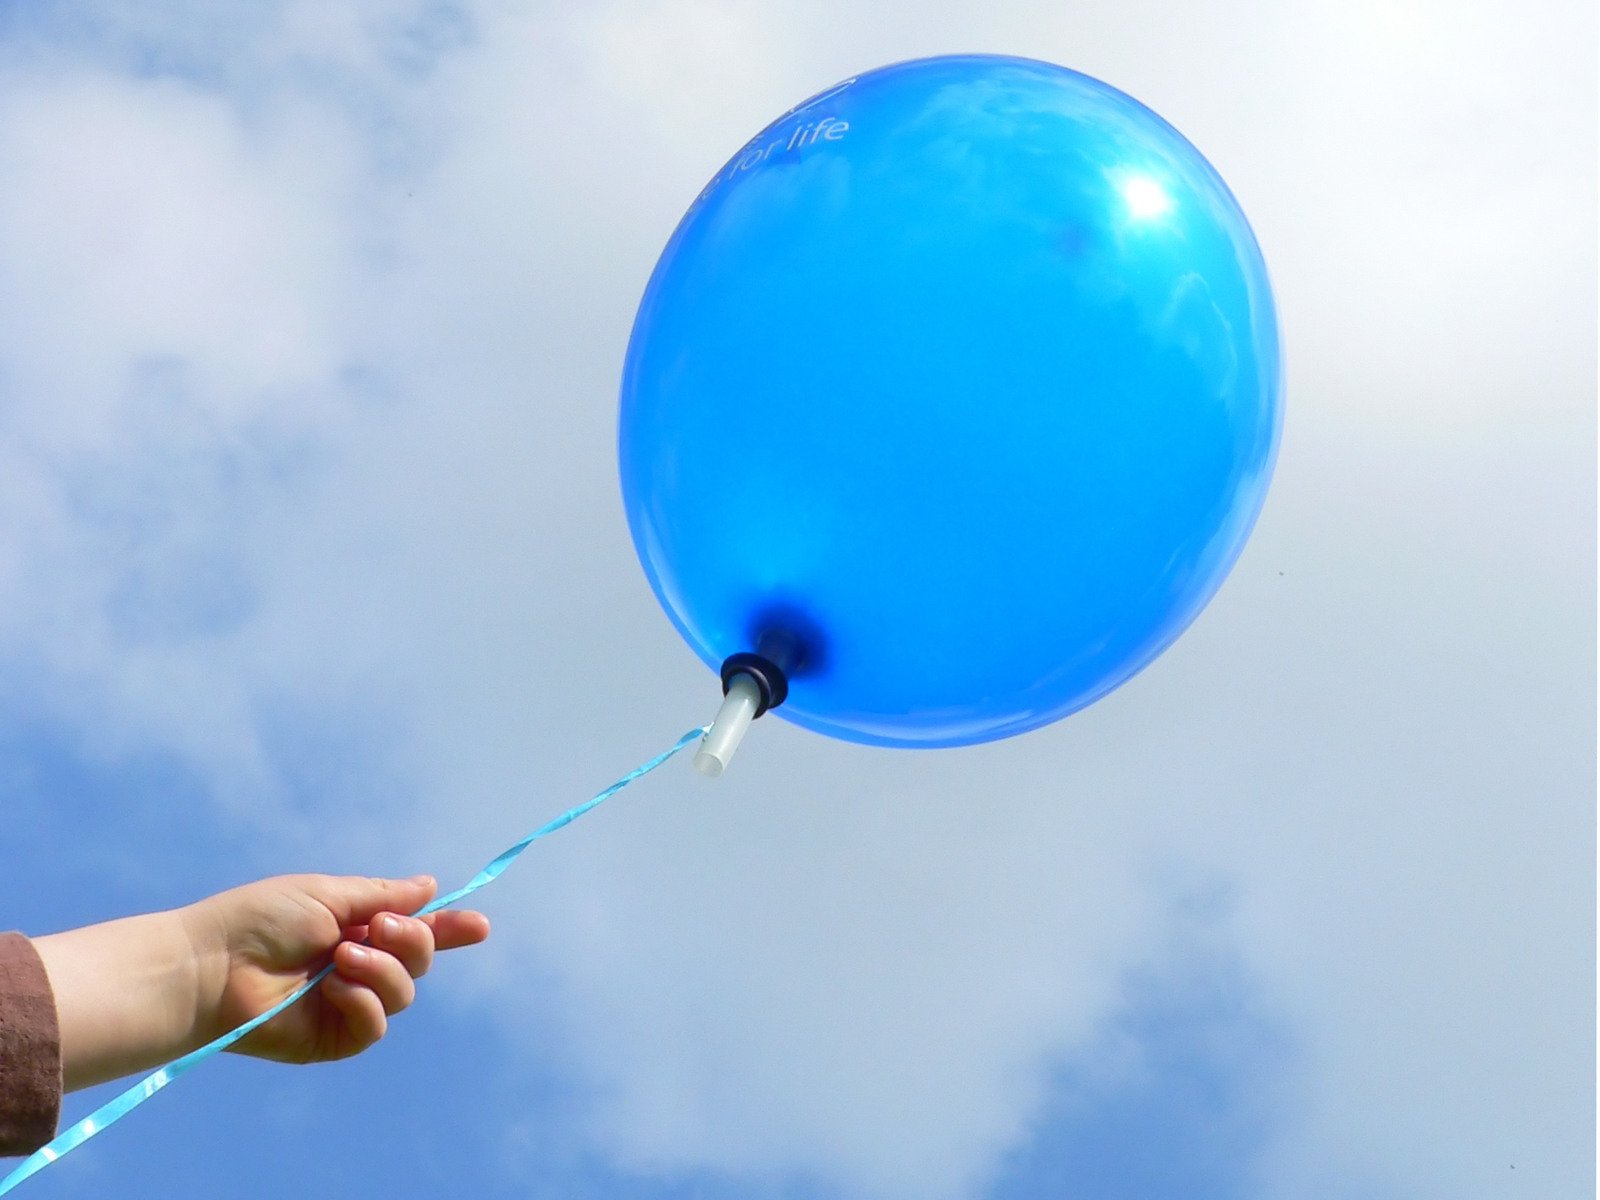 the blue balloon is being released by someone